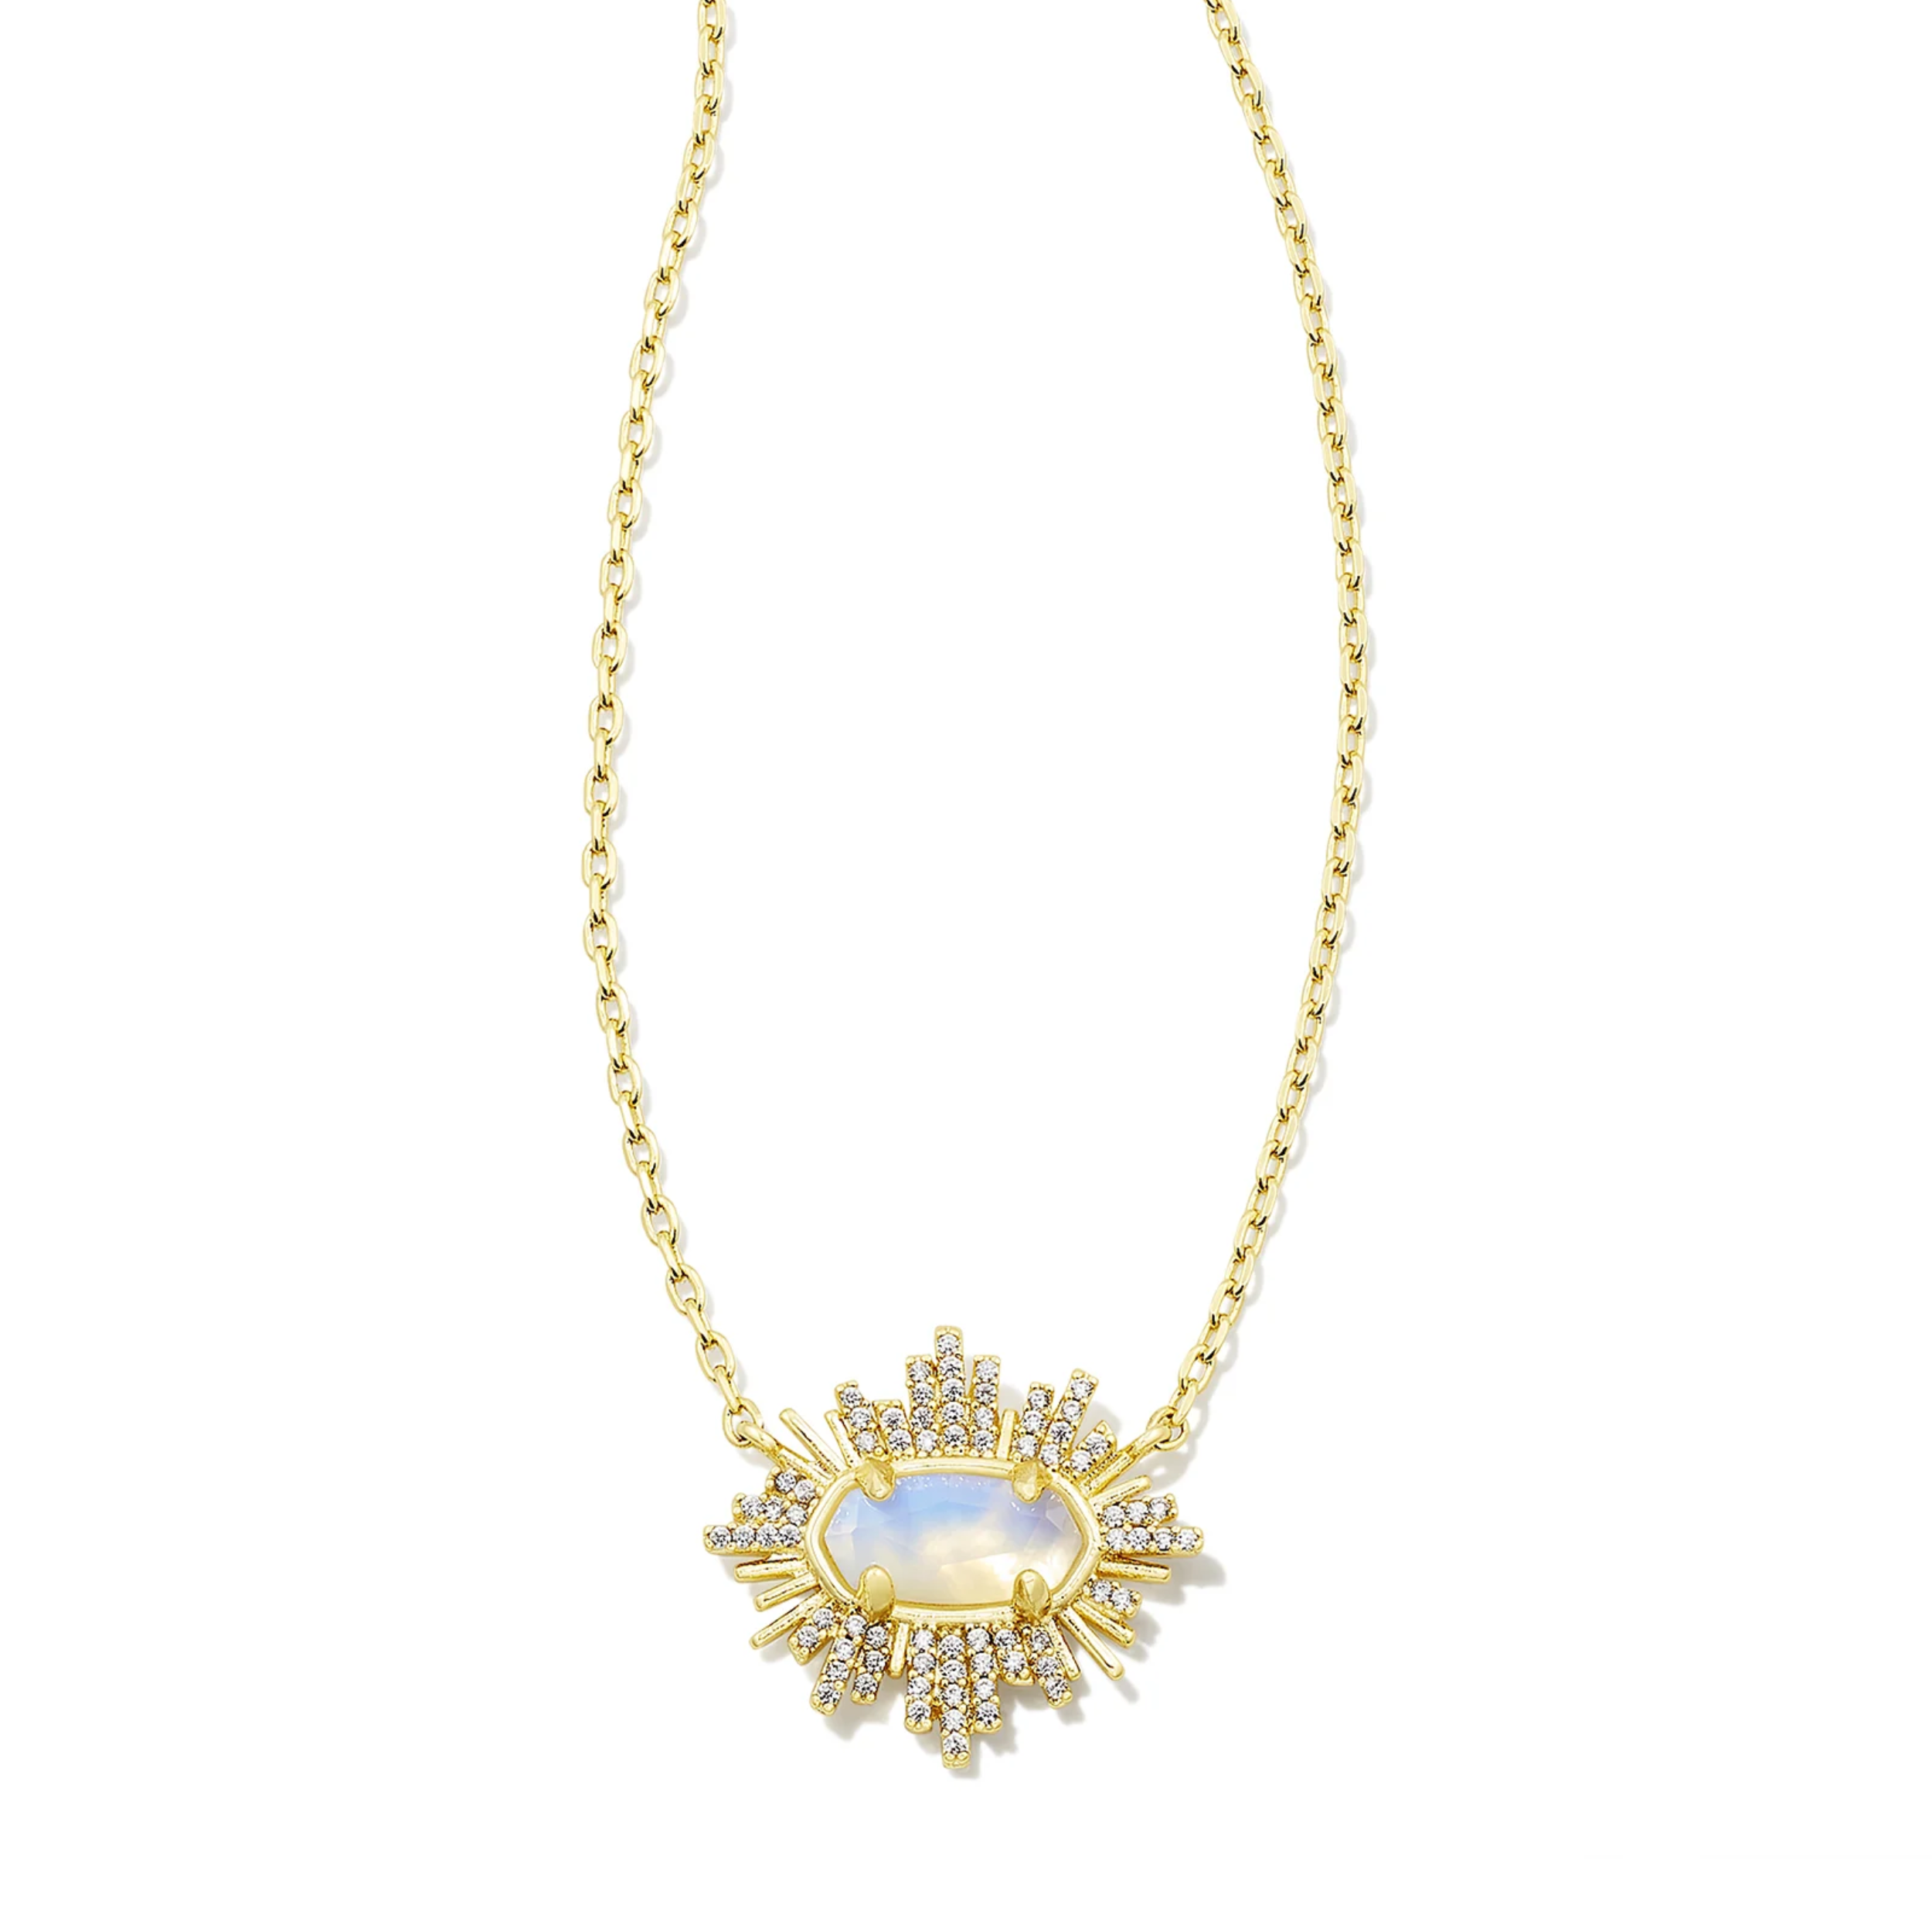 This grayson Sunburst Gold Frame Pendant Necklace in Iridescent Opalite illusion by Kendra Scott is pictured on a white background.